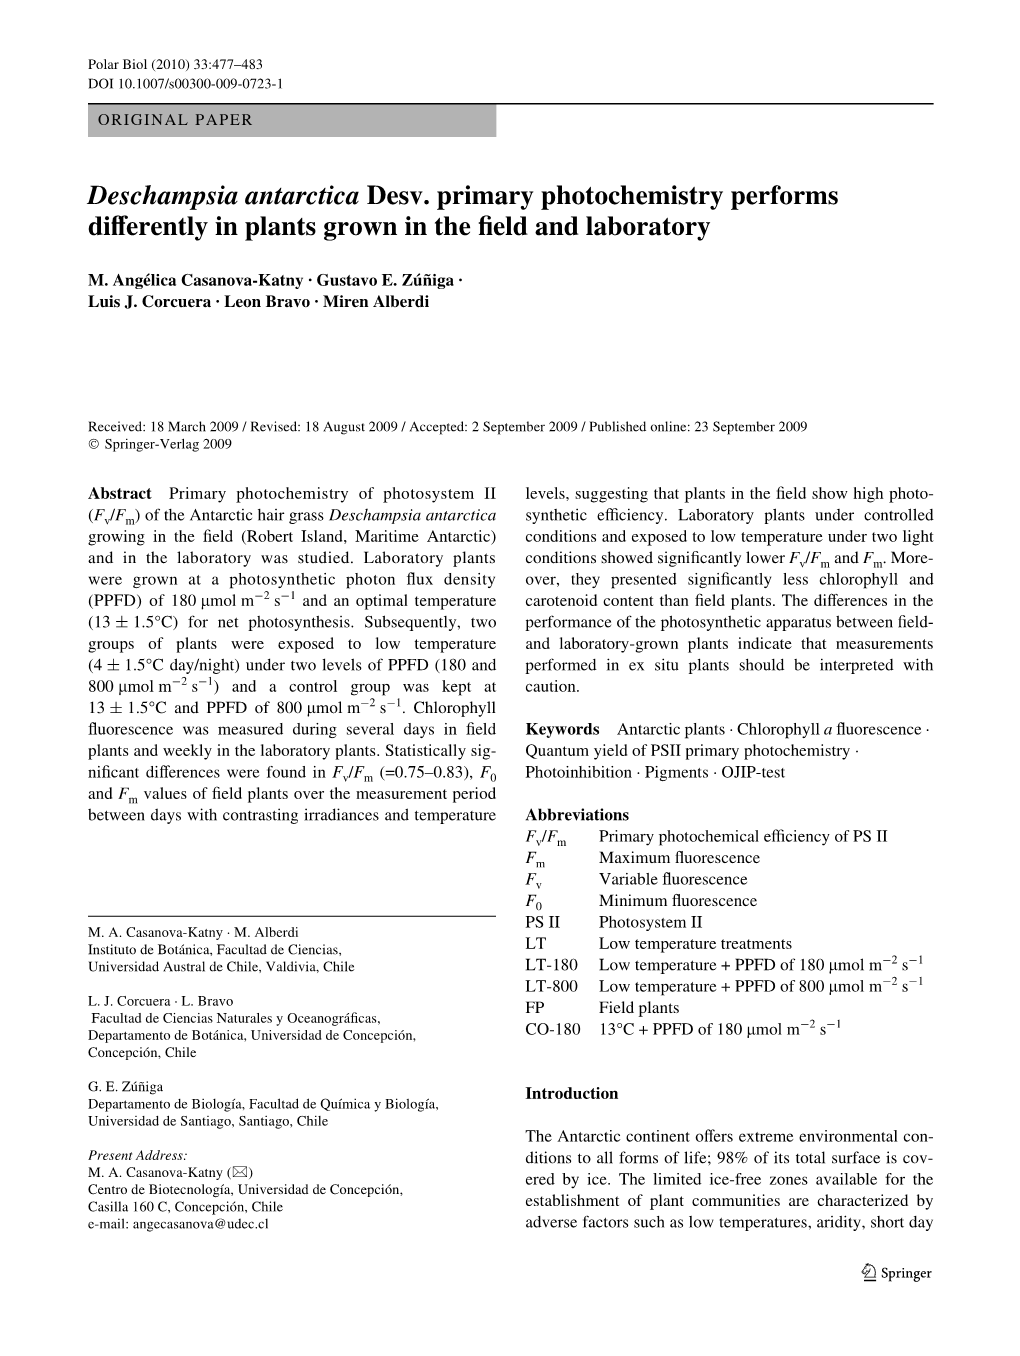 Deschampsia Antarctica Desv. Primary Photochemistry Performs Diverently in Plants Grown in the Weld and Laboratory